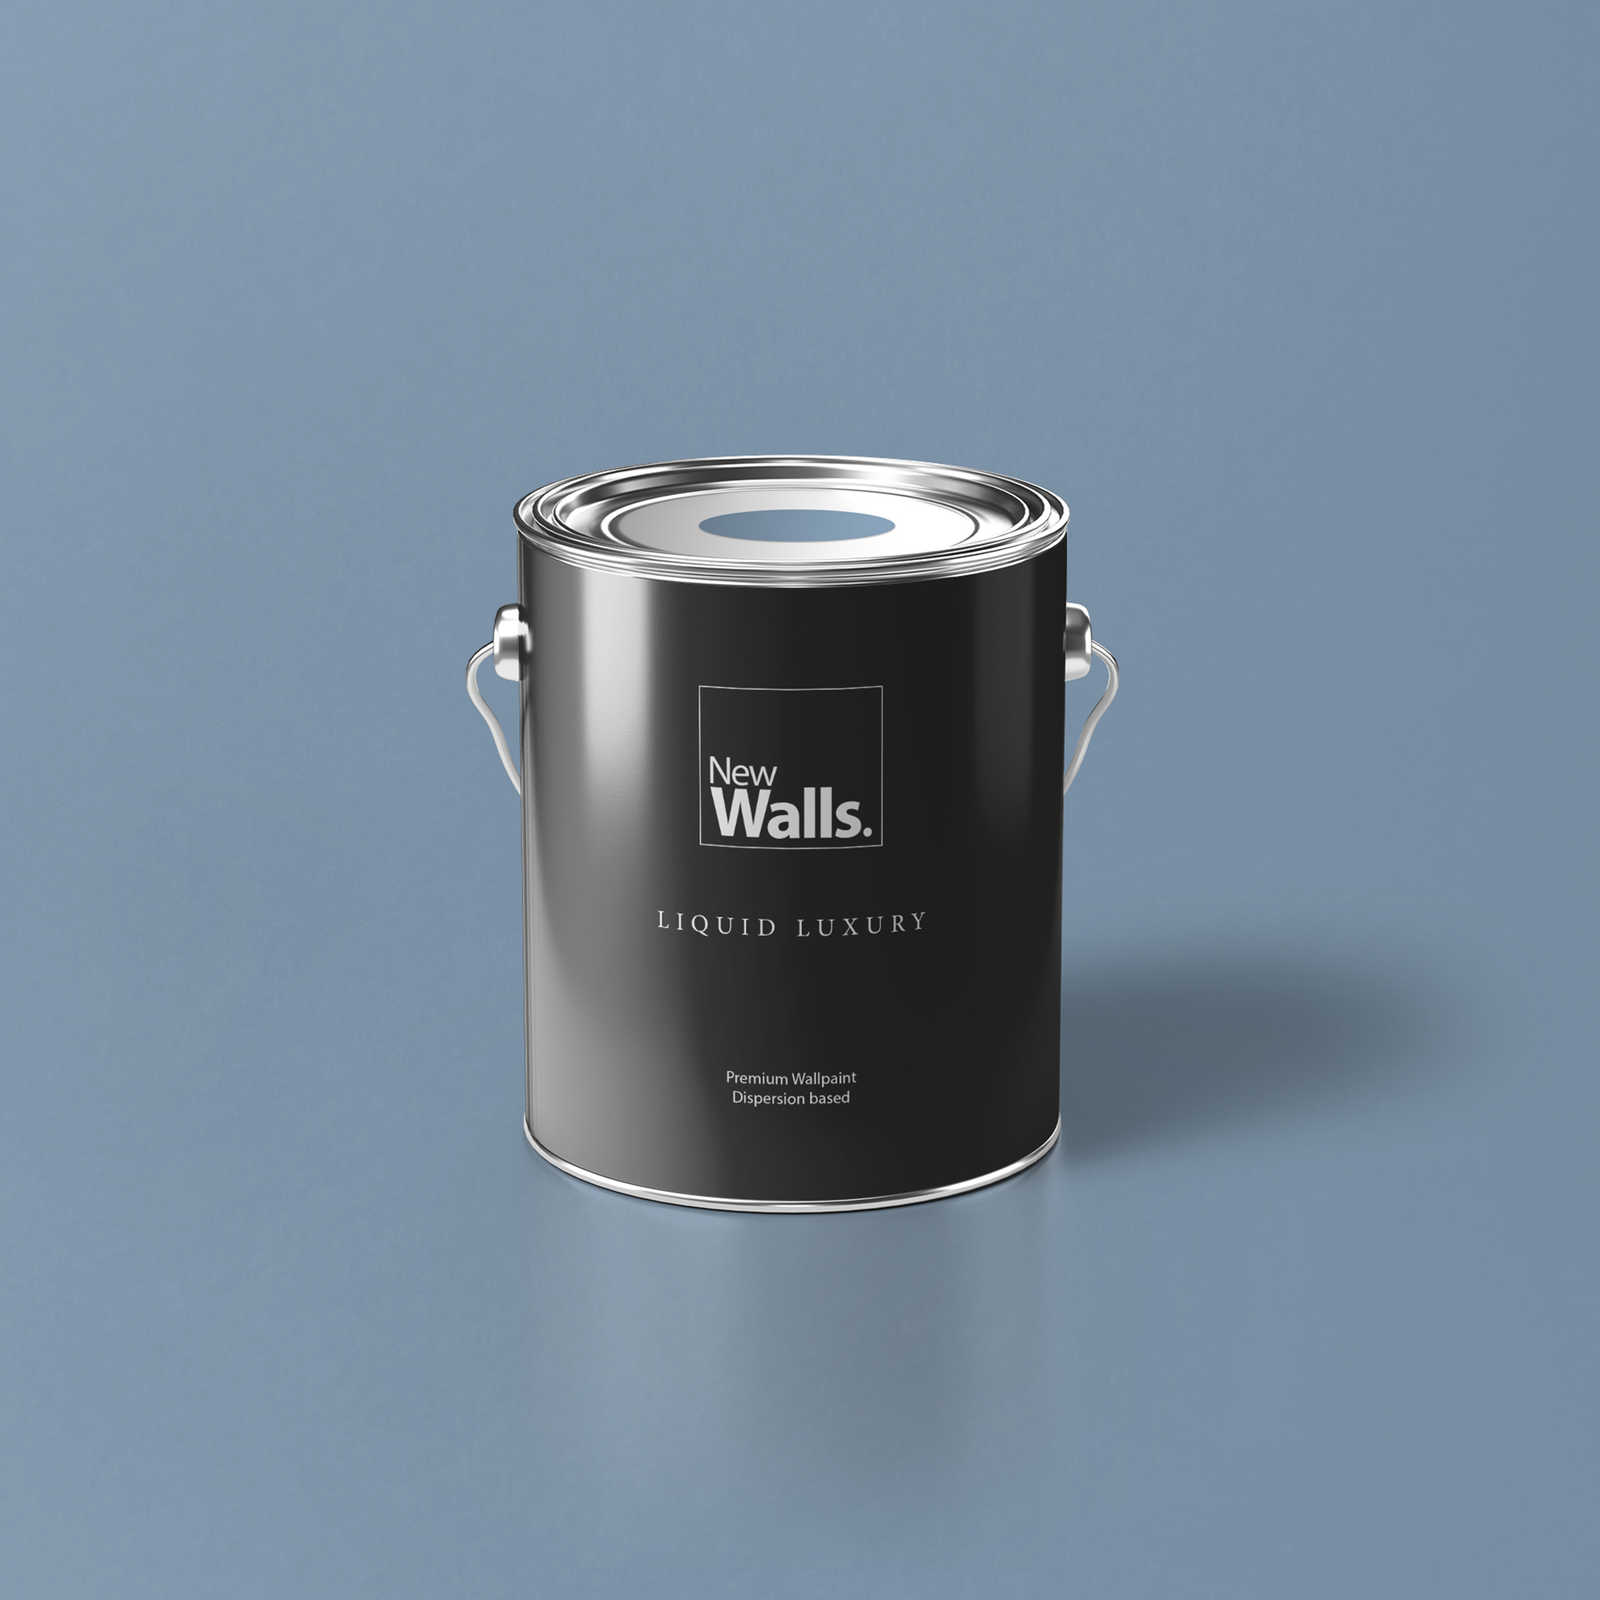 Premium Wall Paint Balanced Nordic Blue »Blissful Blue« NW305 – 2.5 litre
